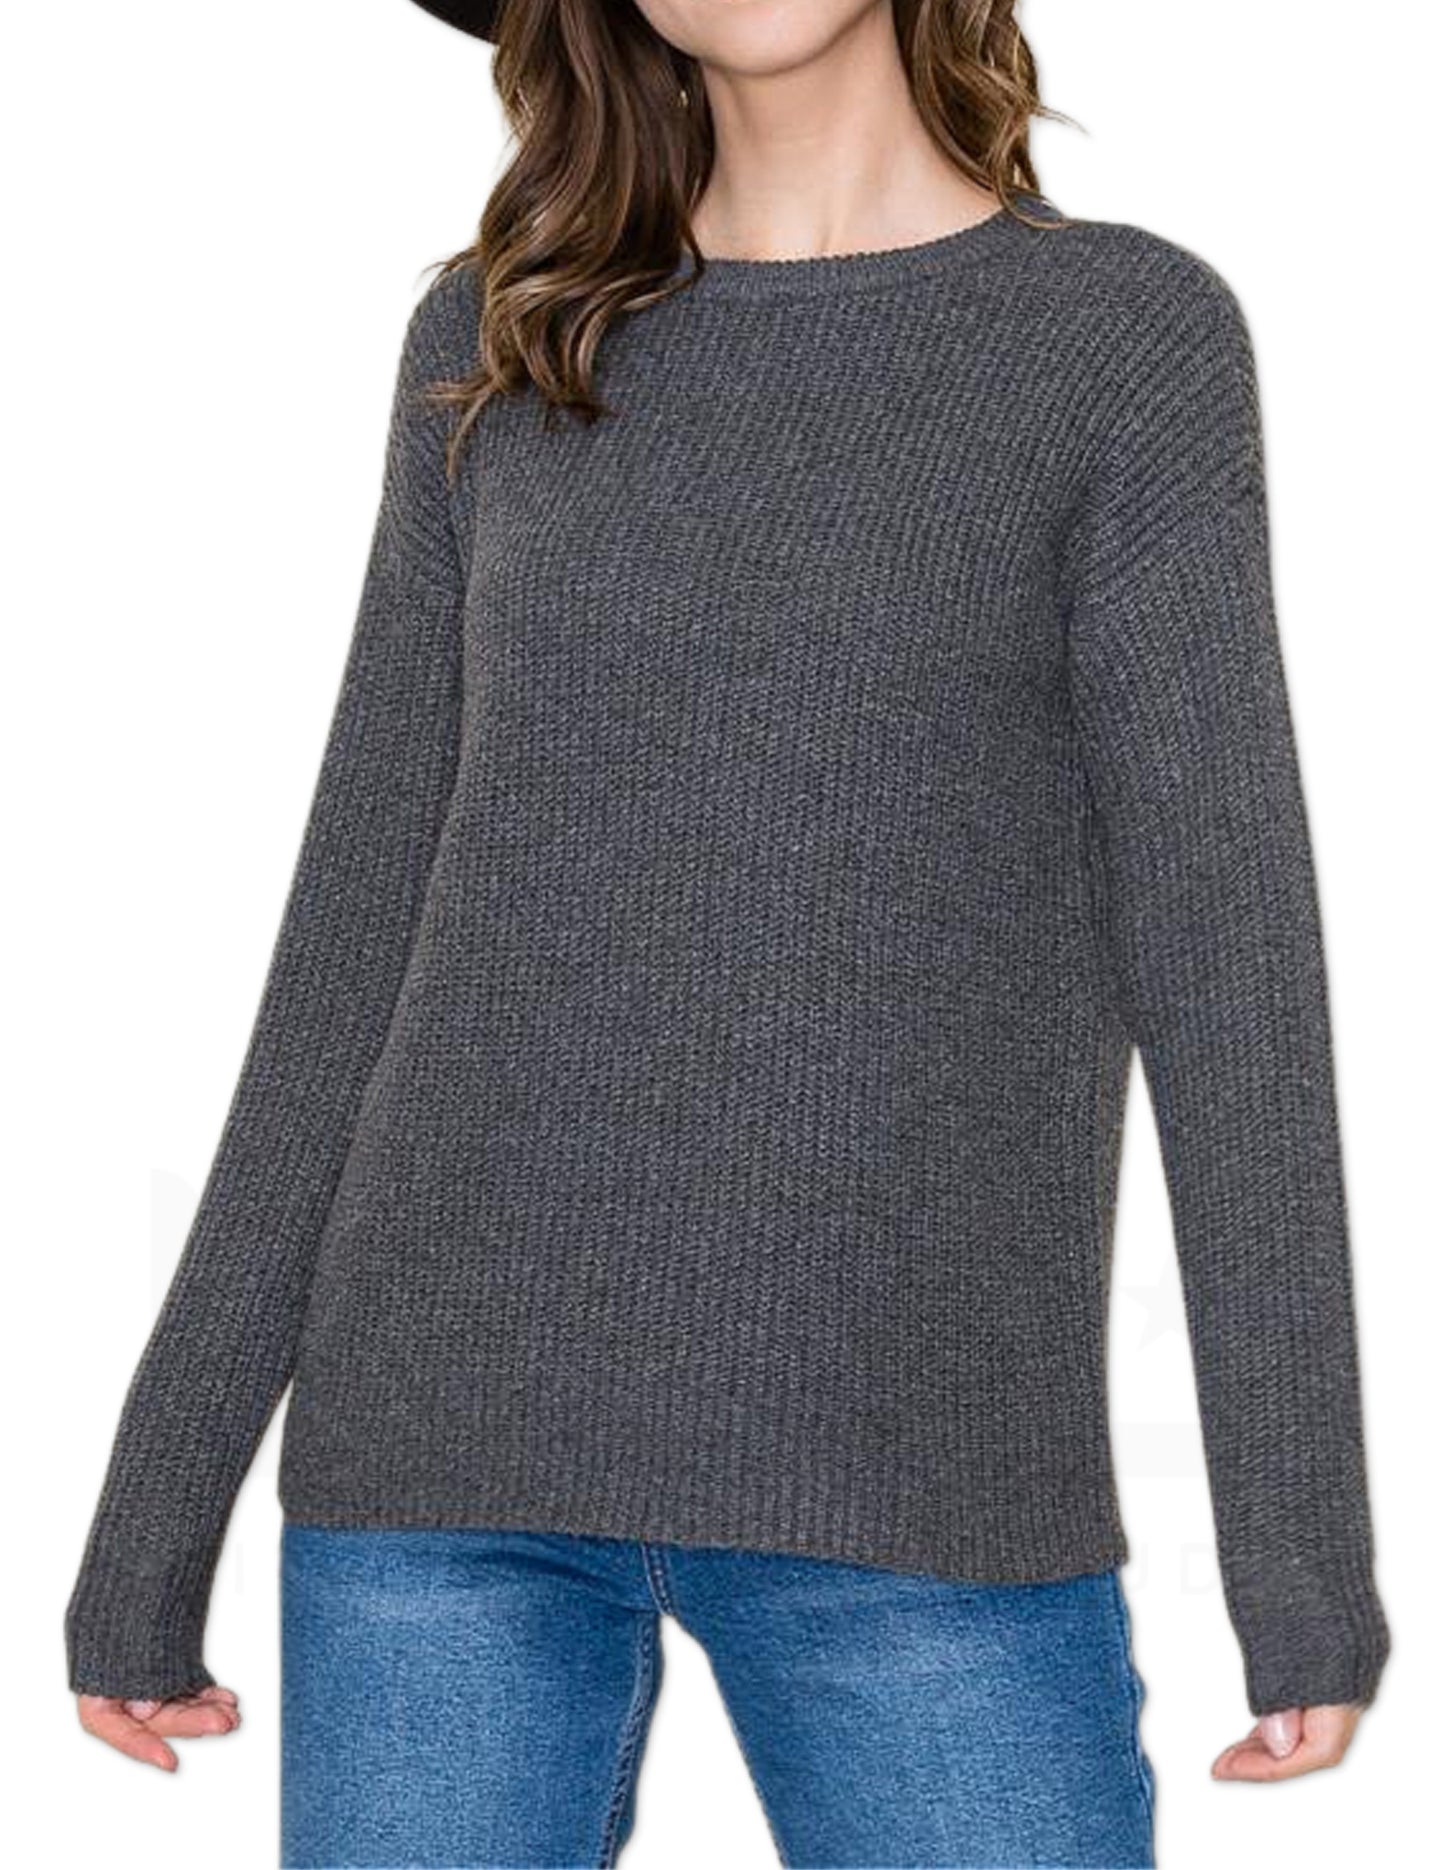 Comfy Crew Neck Sweater - Charcoal